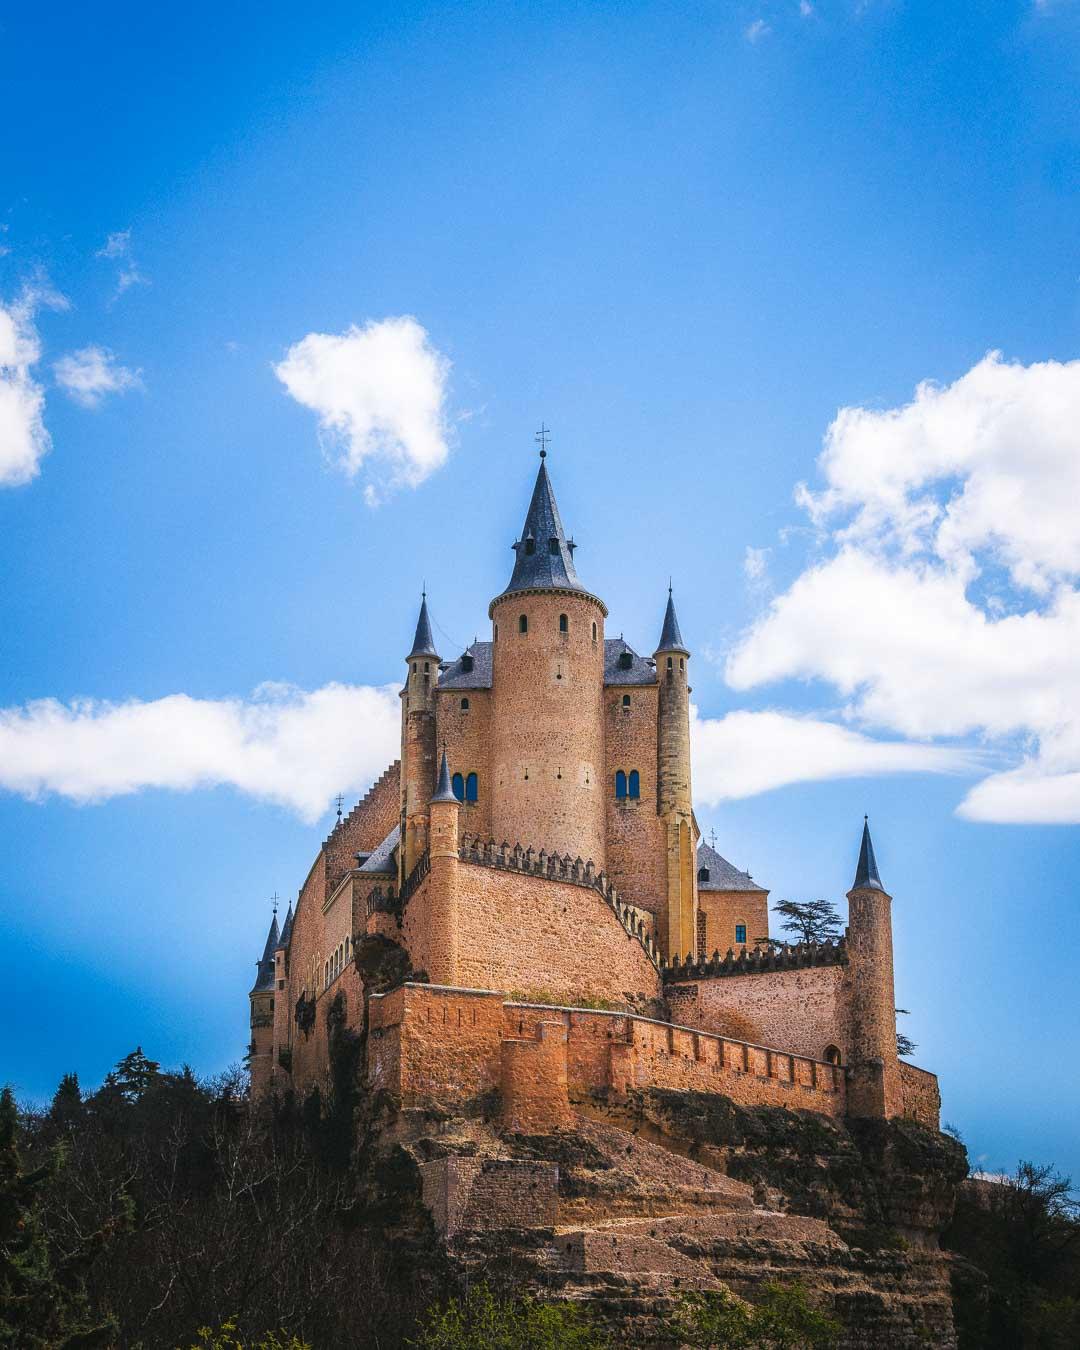 the segovia castle from the front